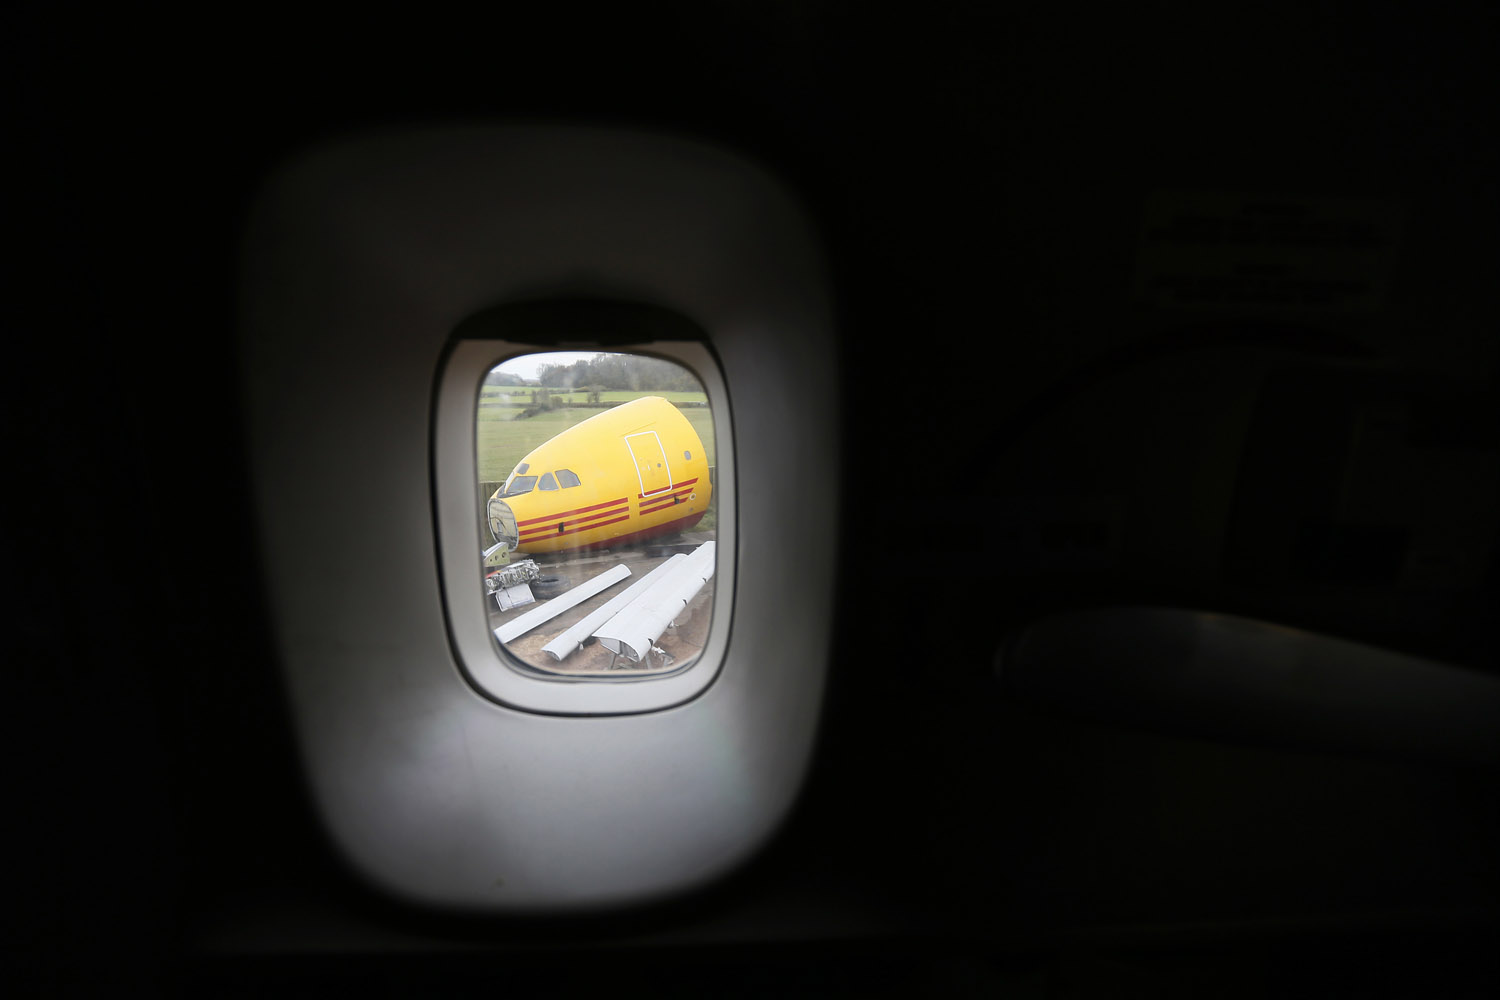 A dismantled Airbus A300 is seen through a window of a Boeing 747 in the recycling yard of Air Salvage International (ASI) in Kemble